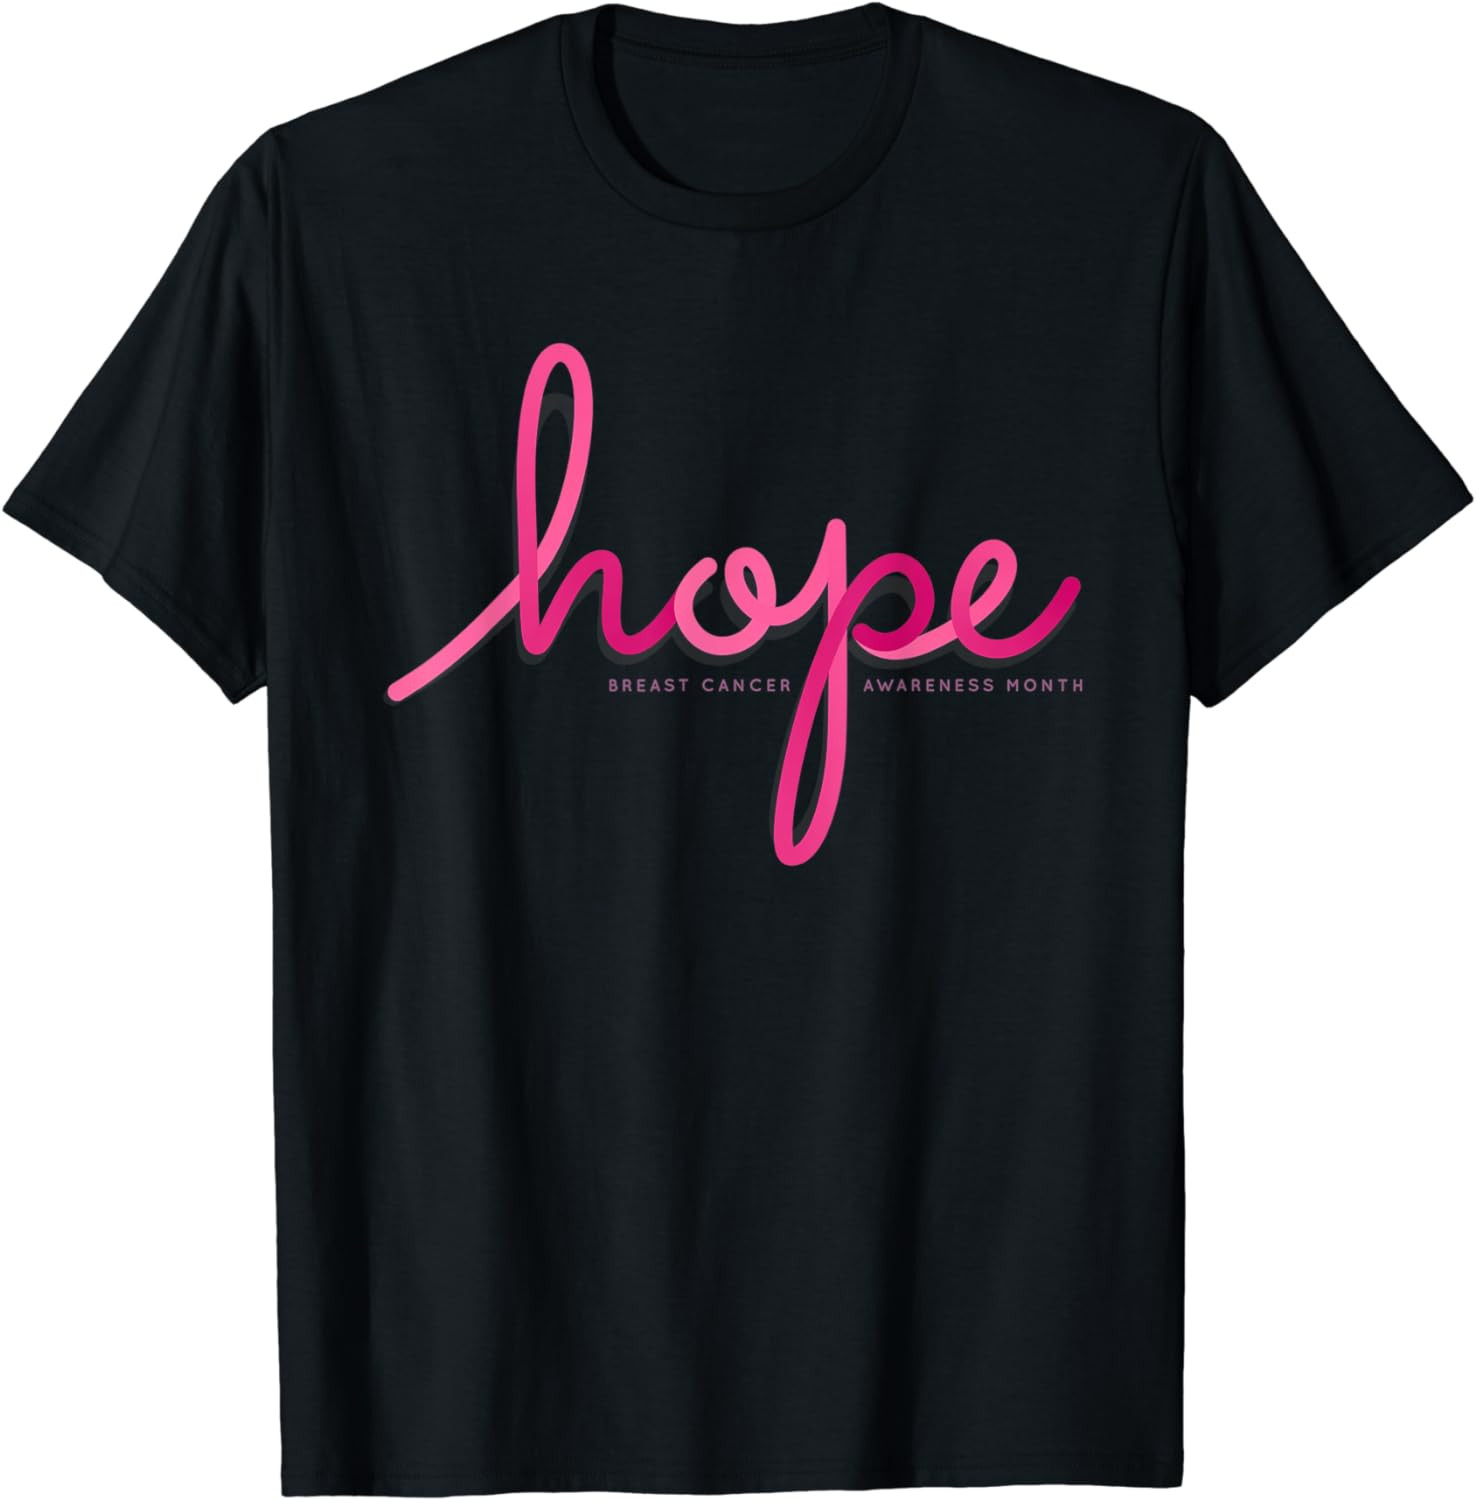 There Is Hope For Breast Cancer Awareness Month T-Shirt